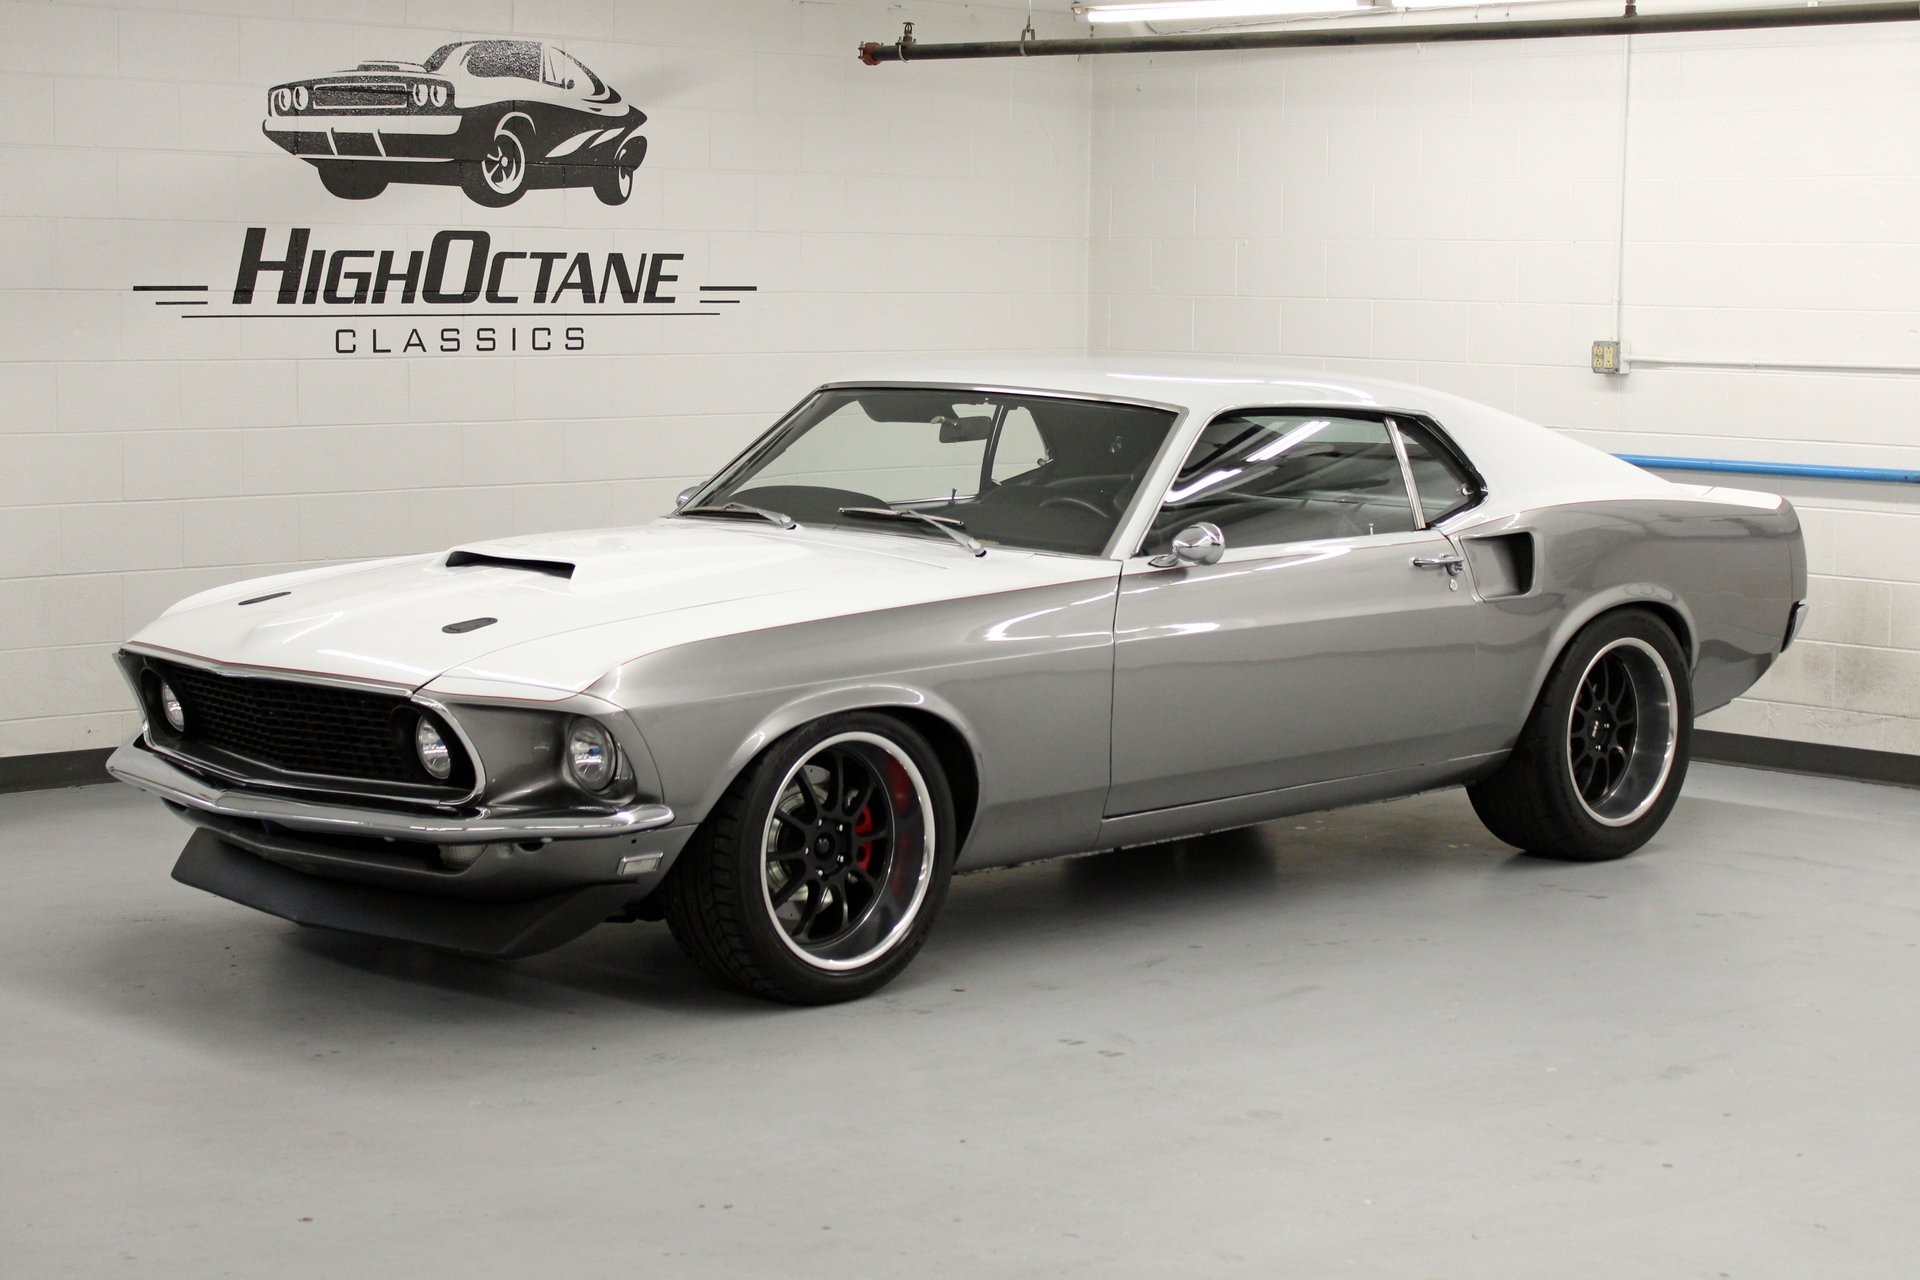 1969 Ford Mustang | Sales, Service and Restoration of Classic Cars ...